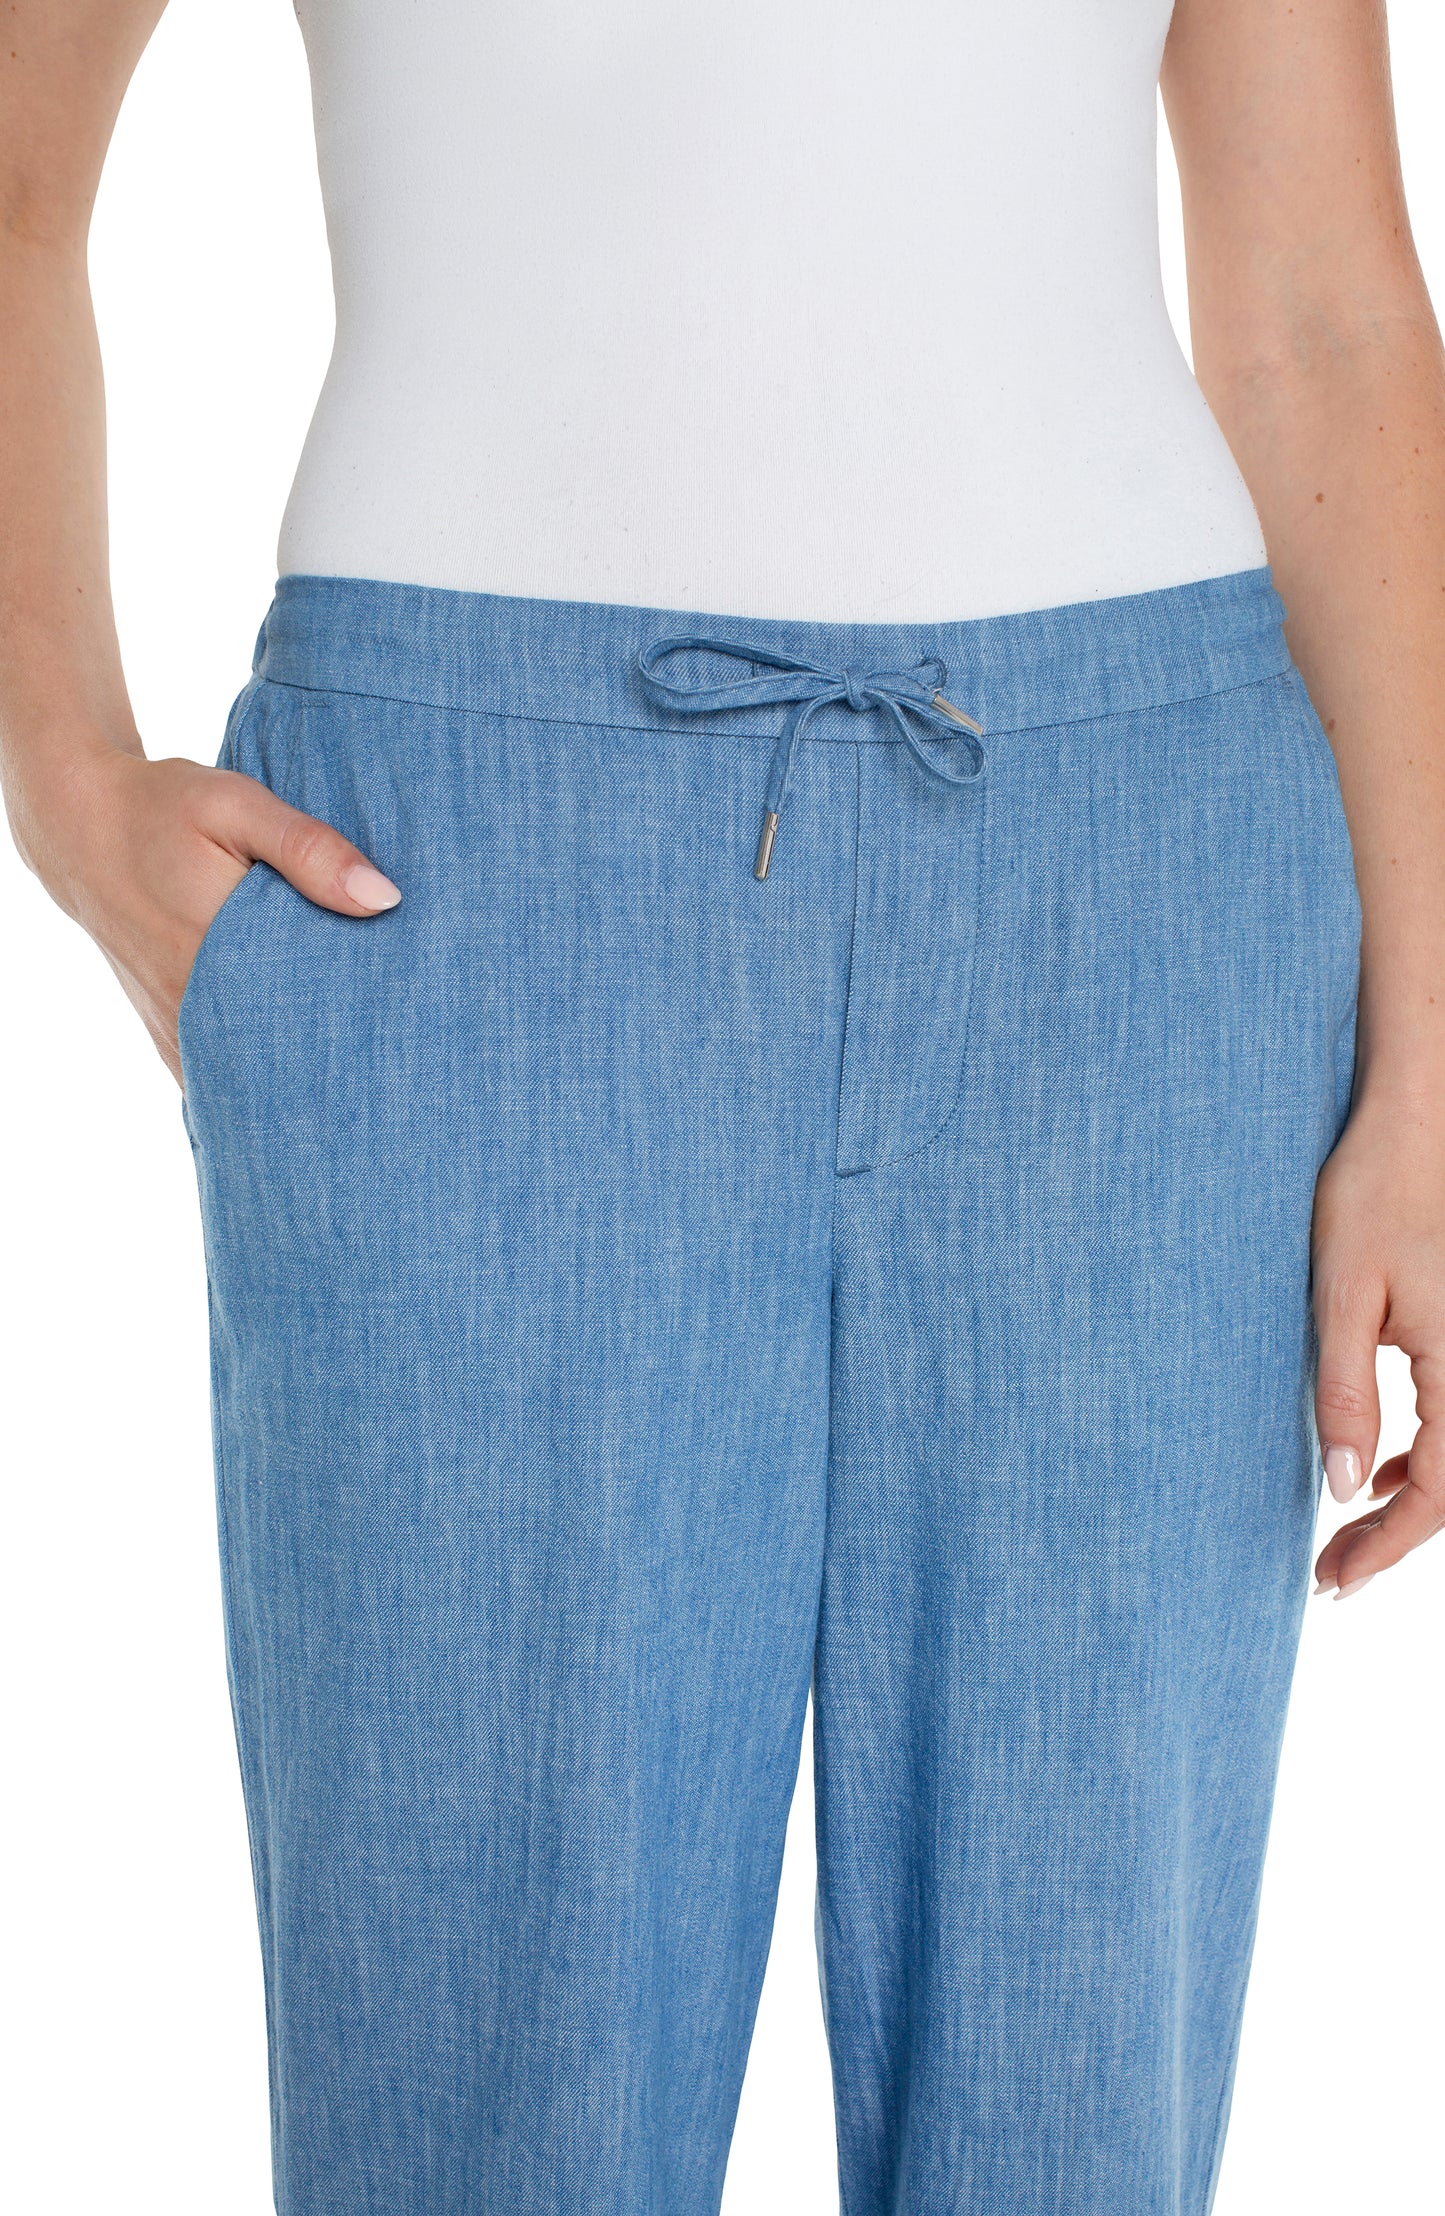 Liverpool - Relaxed Wide Leg Pant